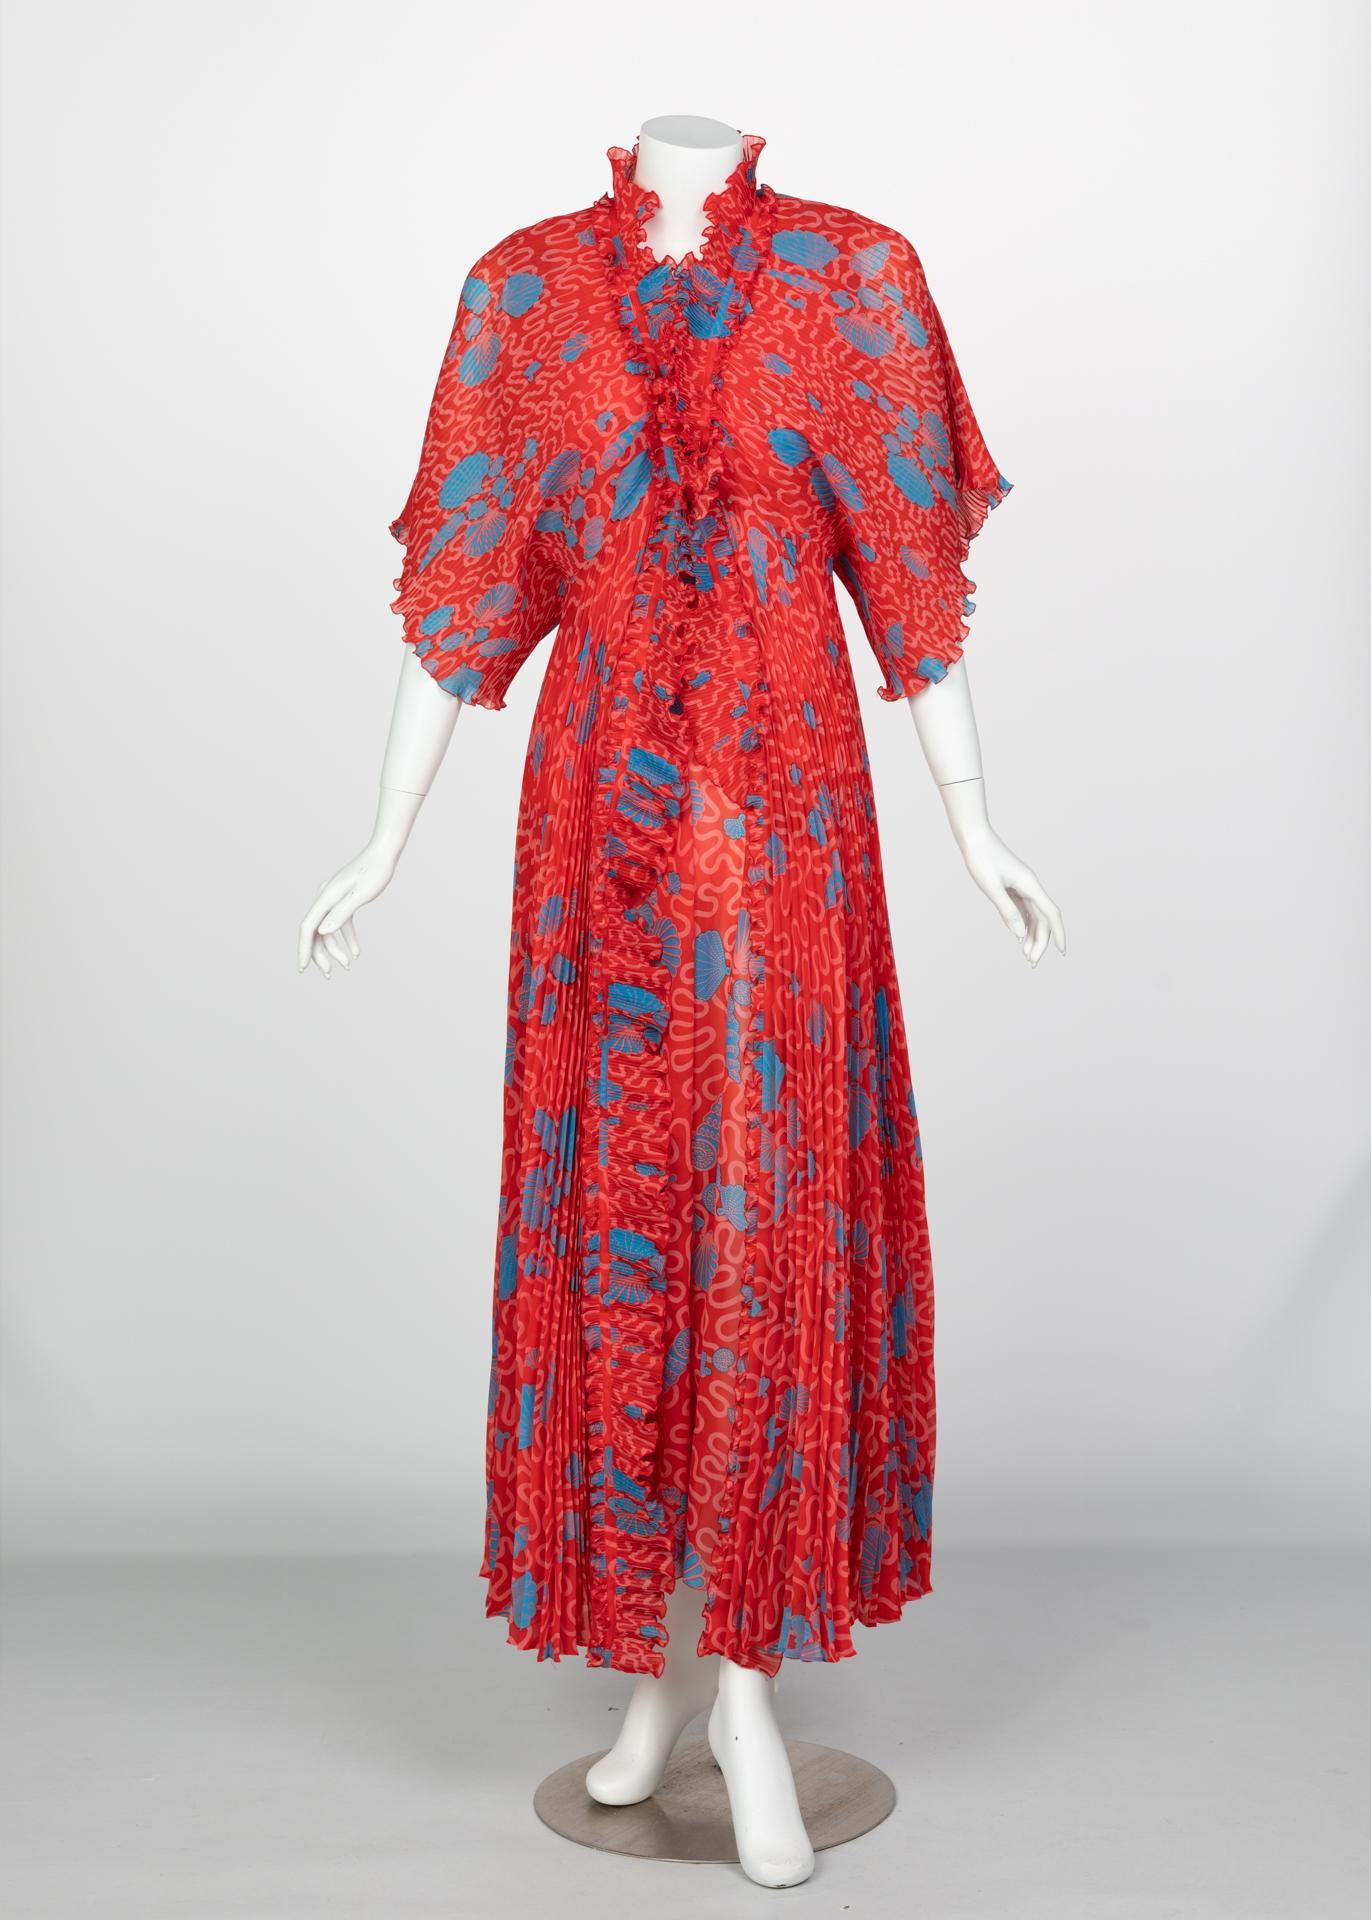 Recently celebrated at Fashion Group International and at the Fashion and Textile Museum, Zandra Rhodes is a prominent, historic designer acclaimed for her eccentric designs in the 1970s. Rhodes’ work often feature vibrant prints with intense colors